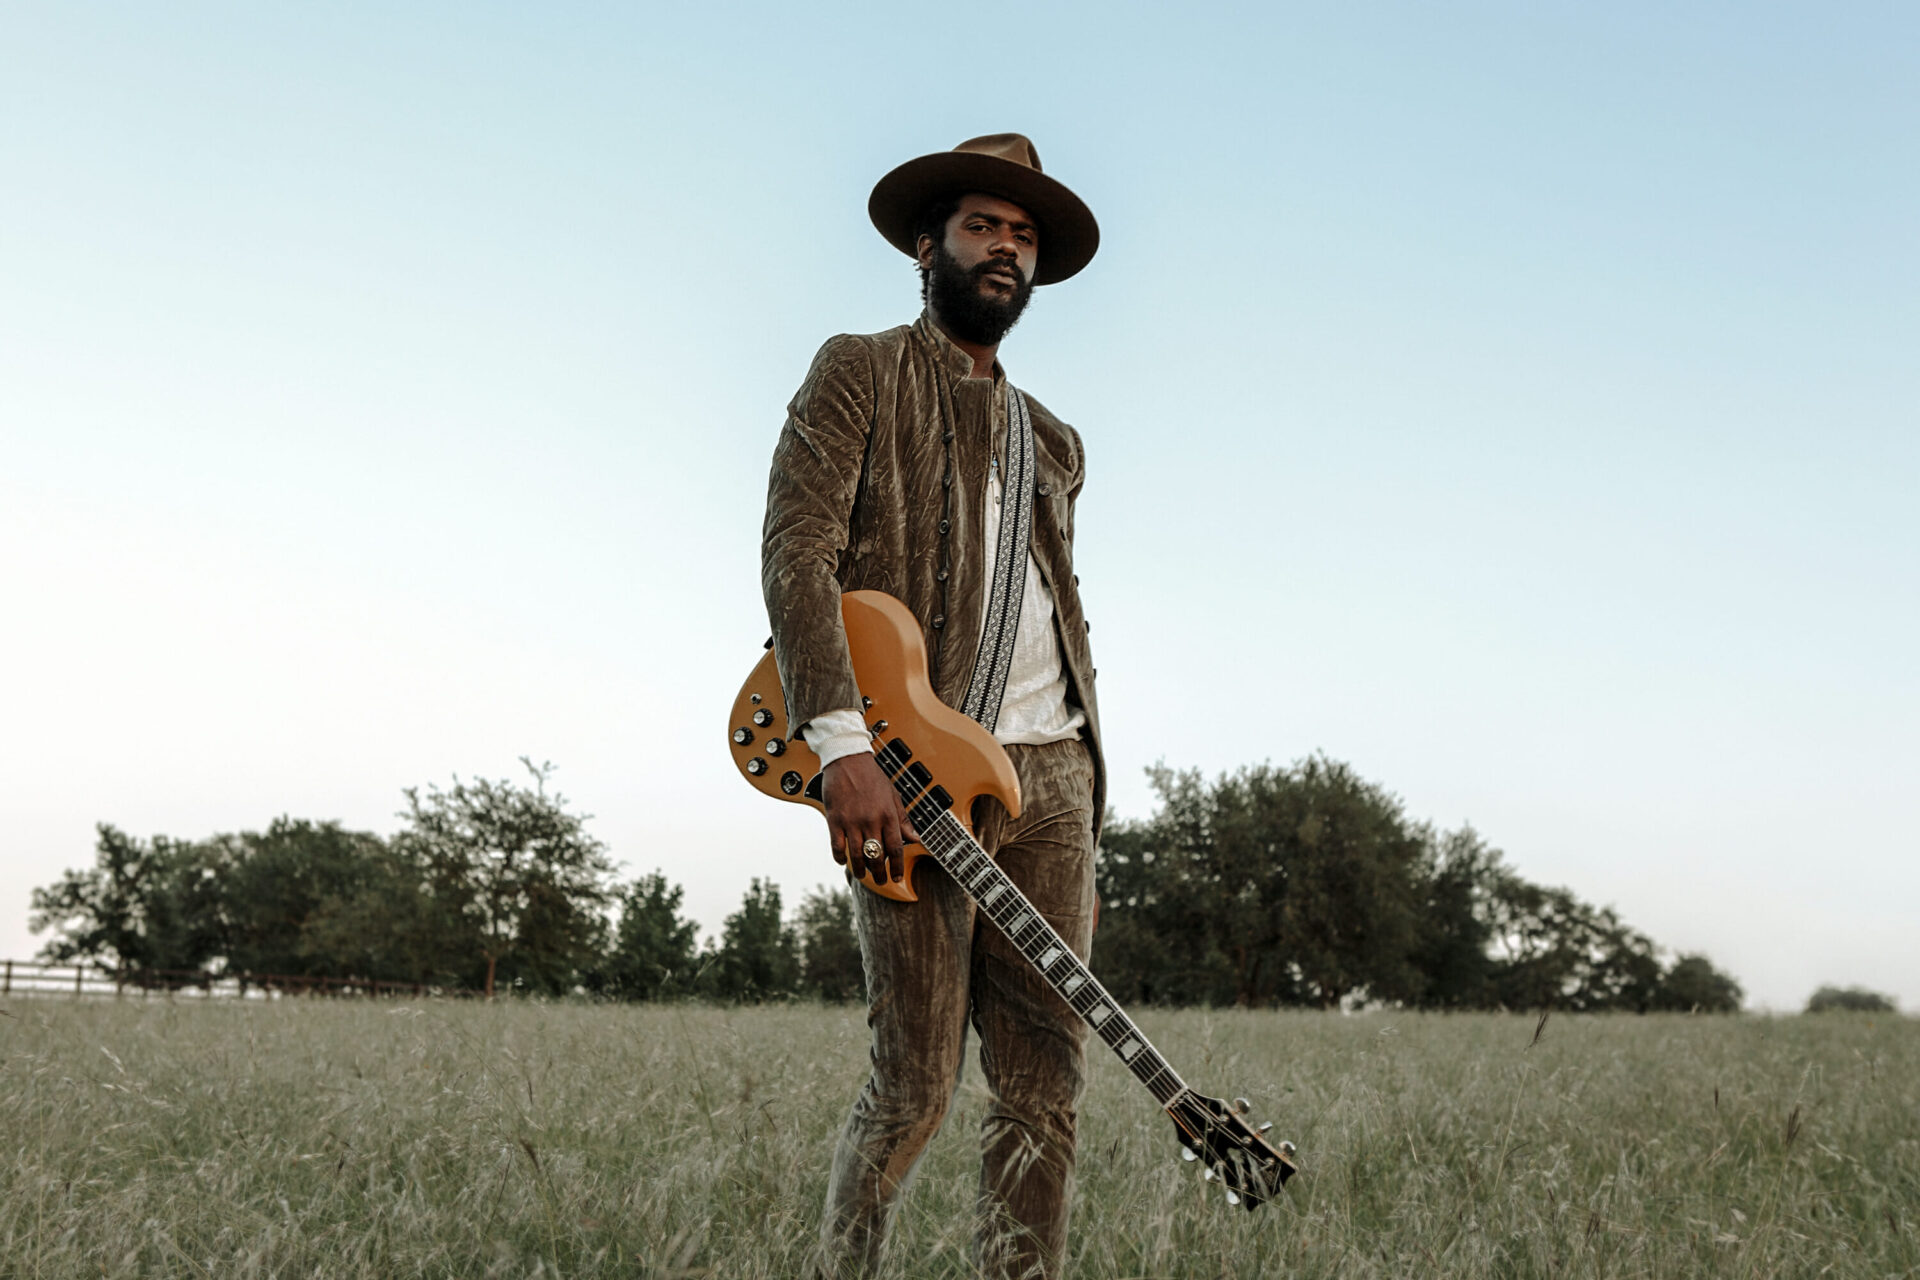 Gary Clark Jr challenges racist America in new single/video “This Land”